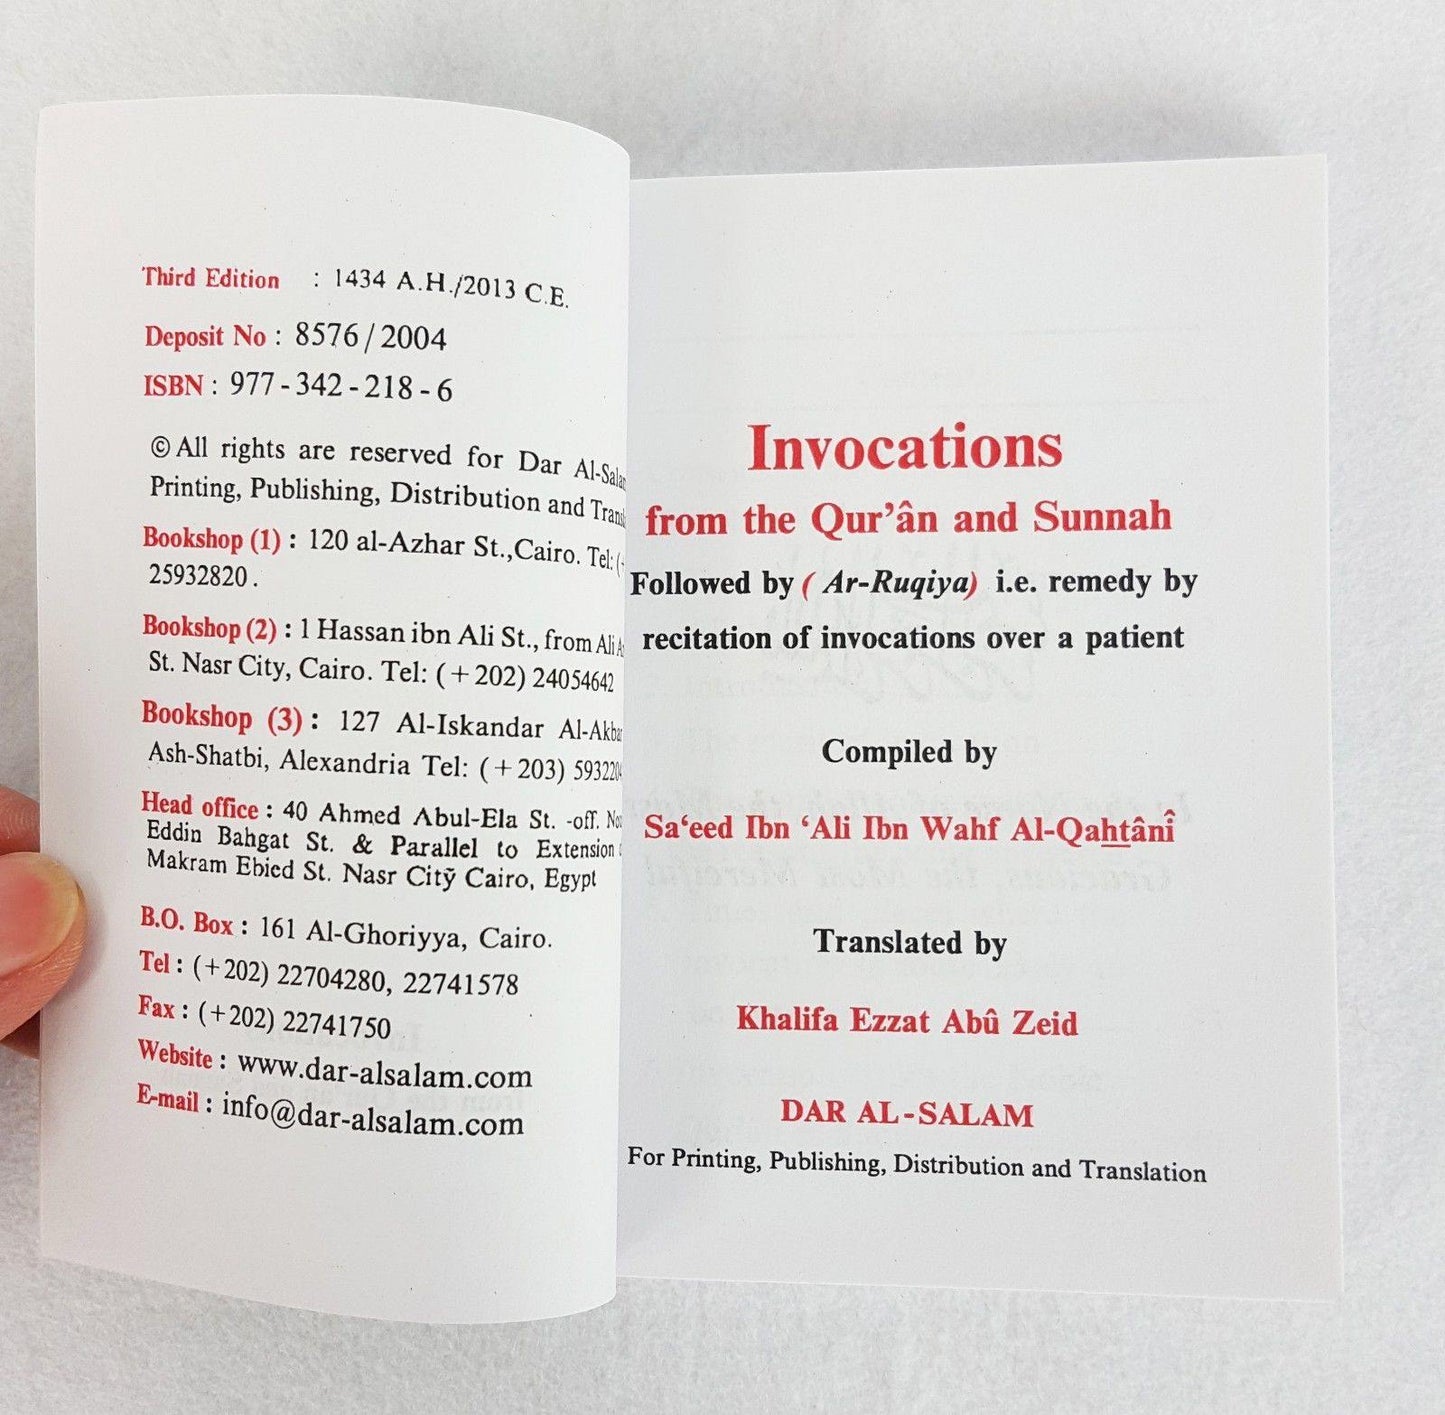 Invocations from the Quran (English) from Dar-Alsalam Pocket Size - Arabian Shopping Zone